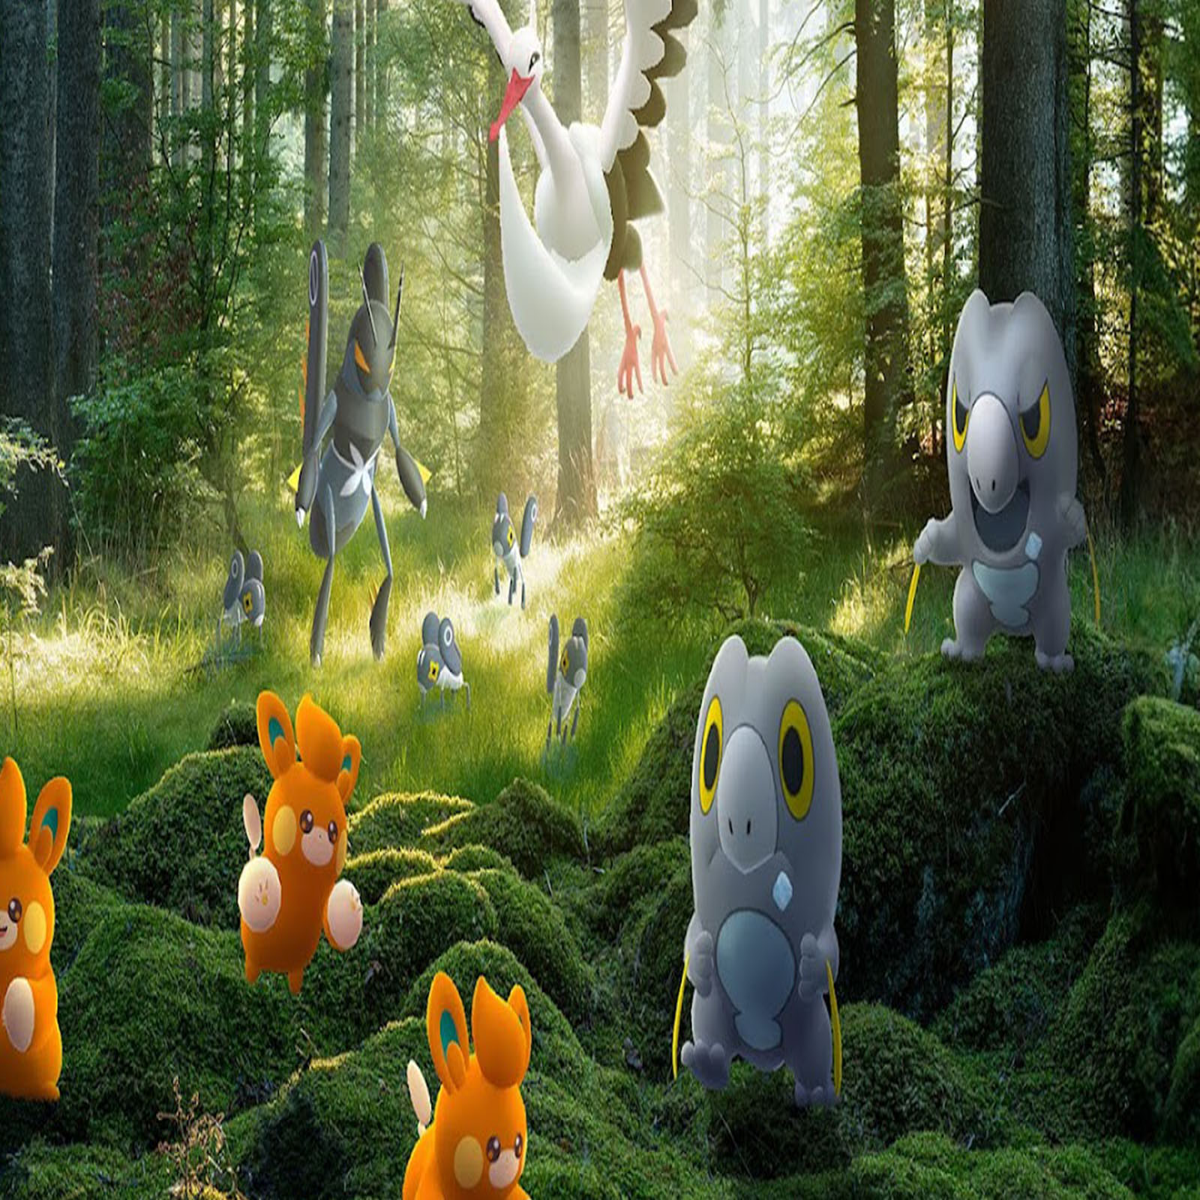 Embark on an adventure with Pokémon first discovered in the Paldea region!  – Pokémon GO